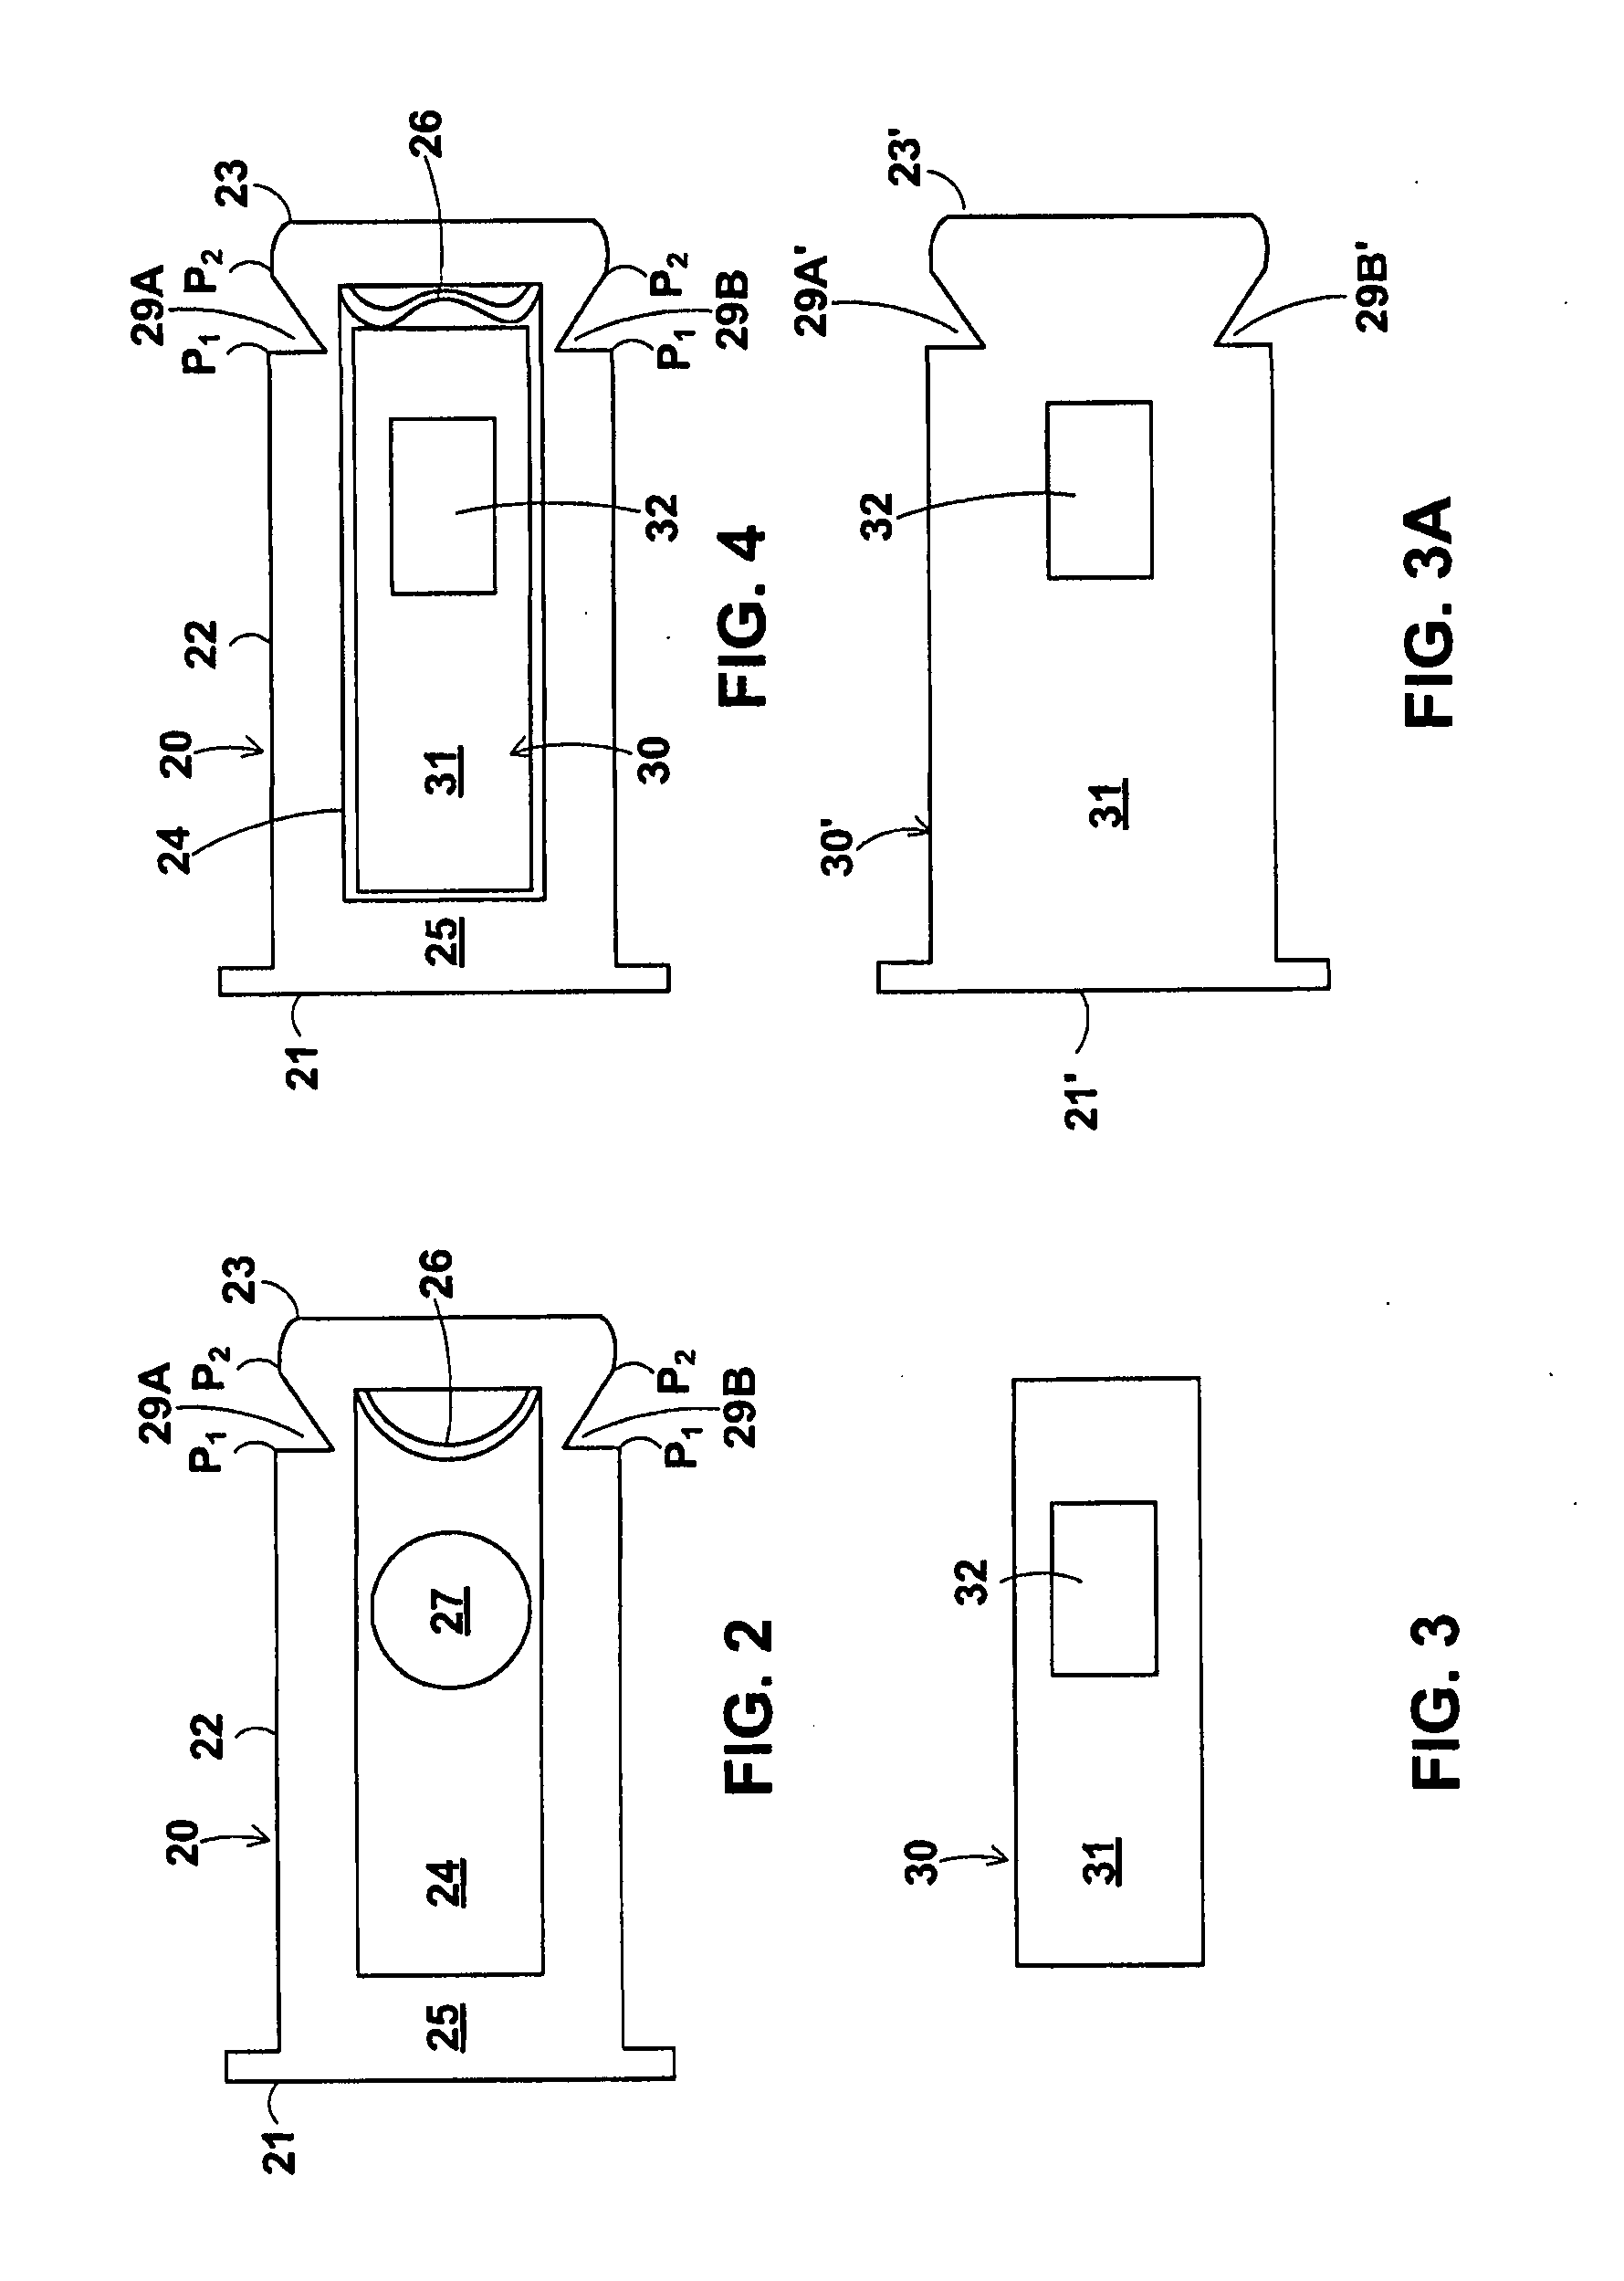 Ejectable component assemblies in electronic devices